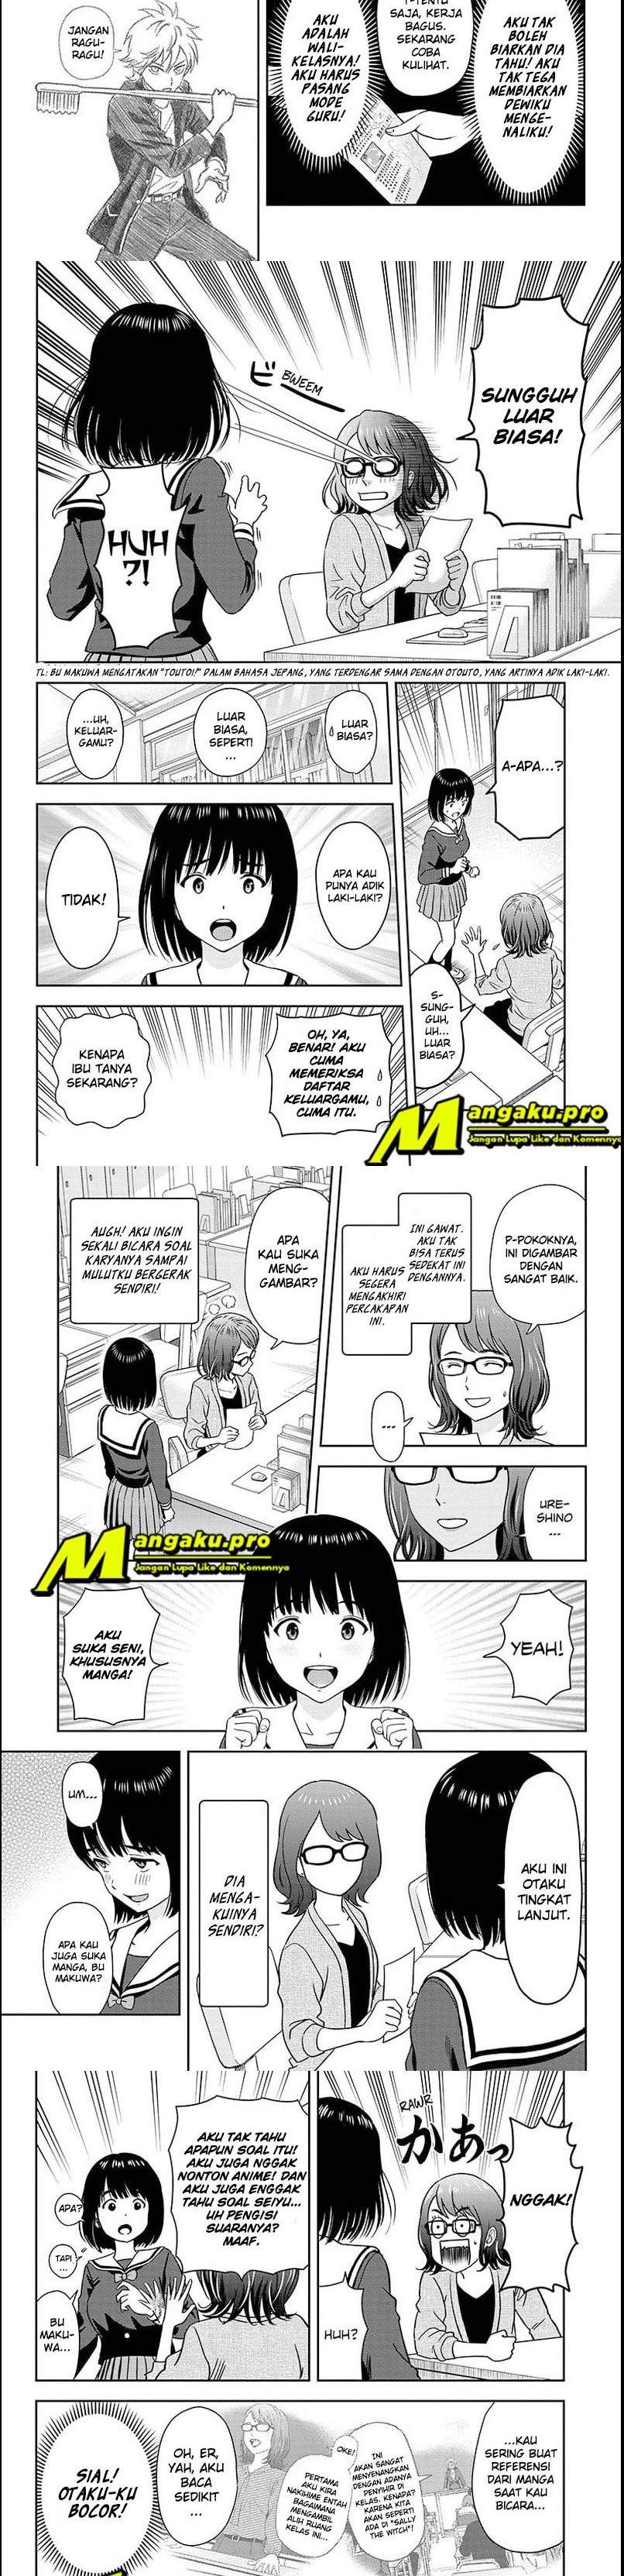 Witch Watch Chapter 13 Bahasa Indonesia